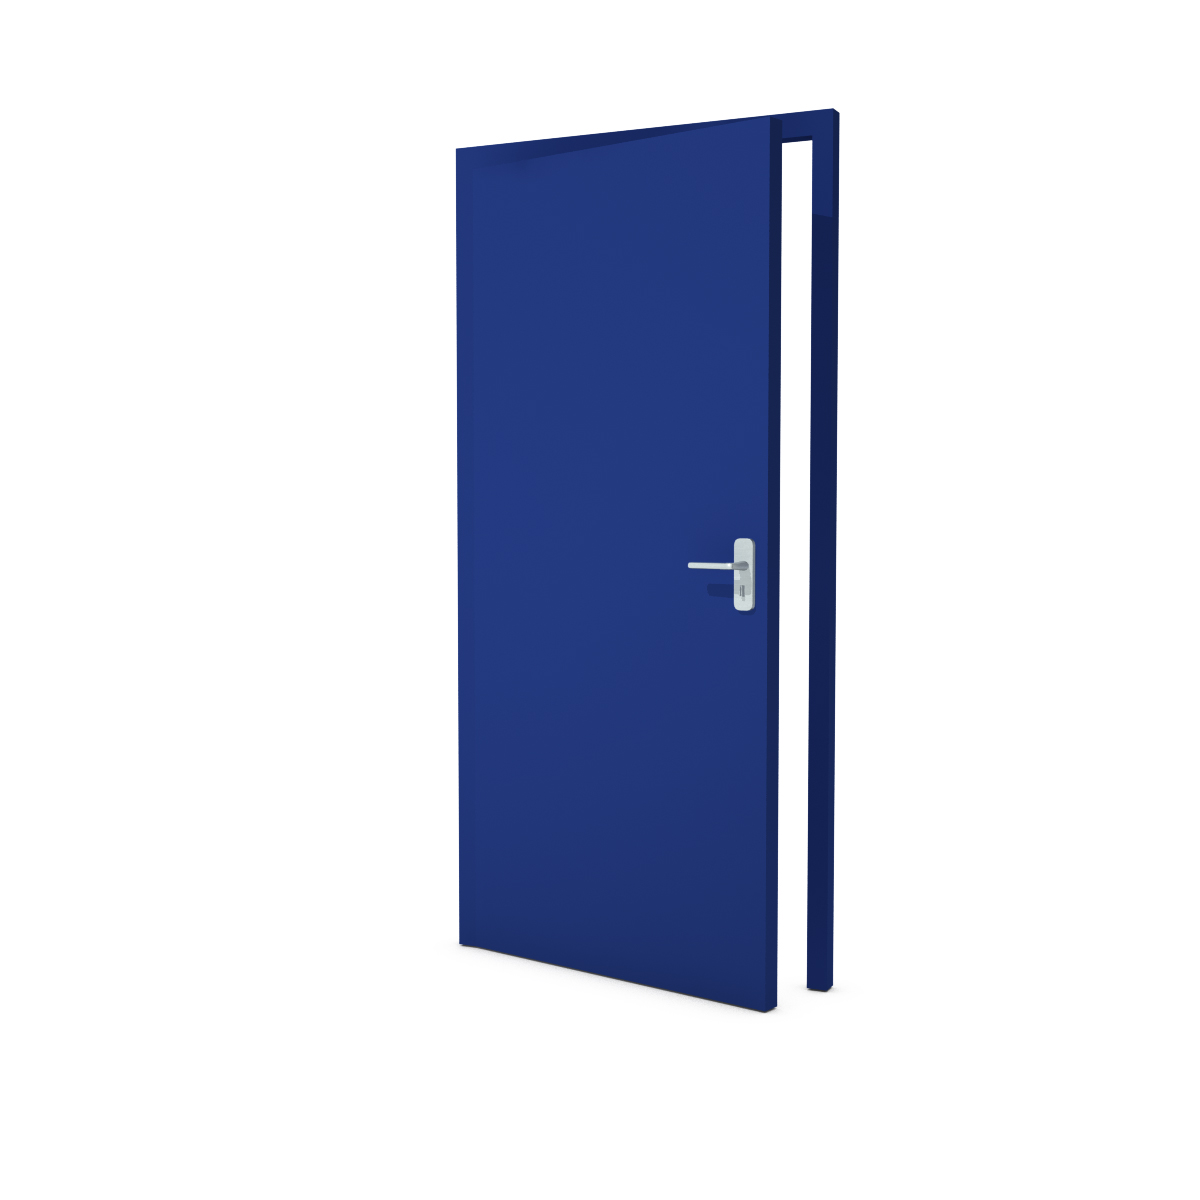 Single door covered in solid-color textile - Royal blue